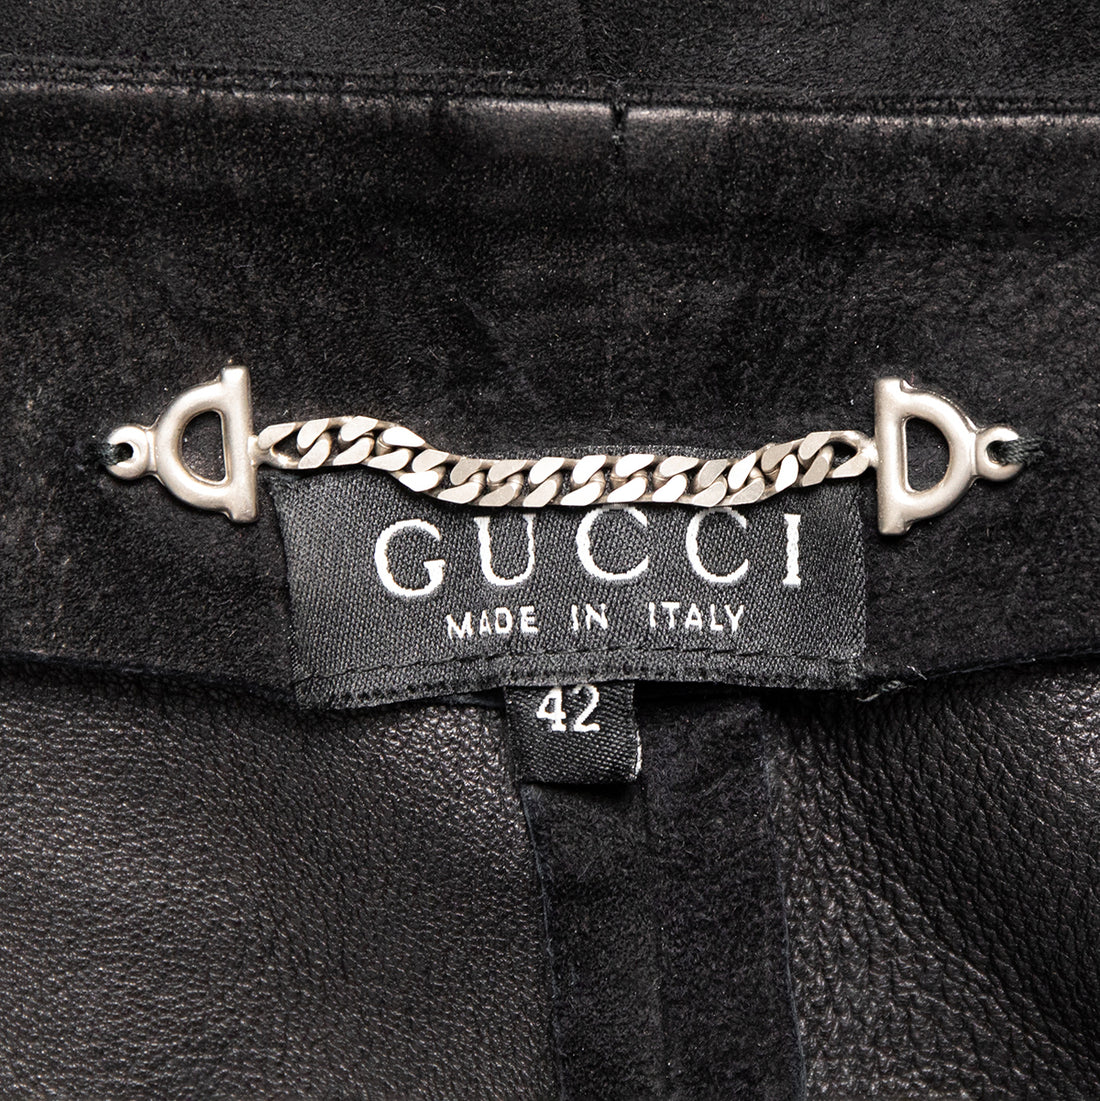 Gucci suede trousers with side lacings